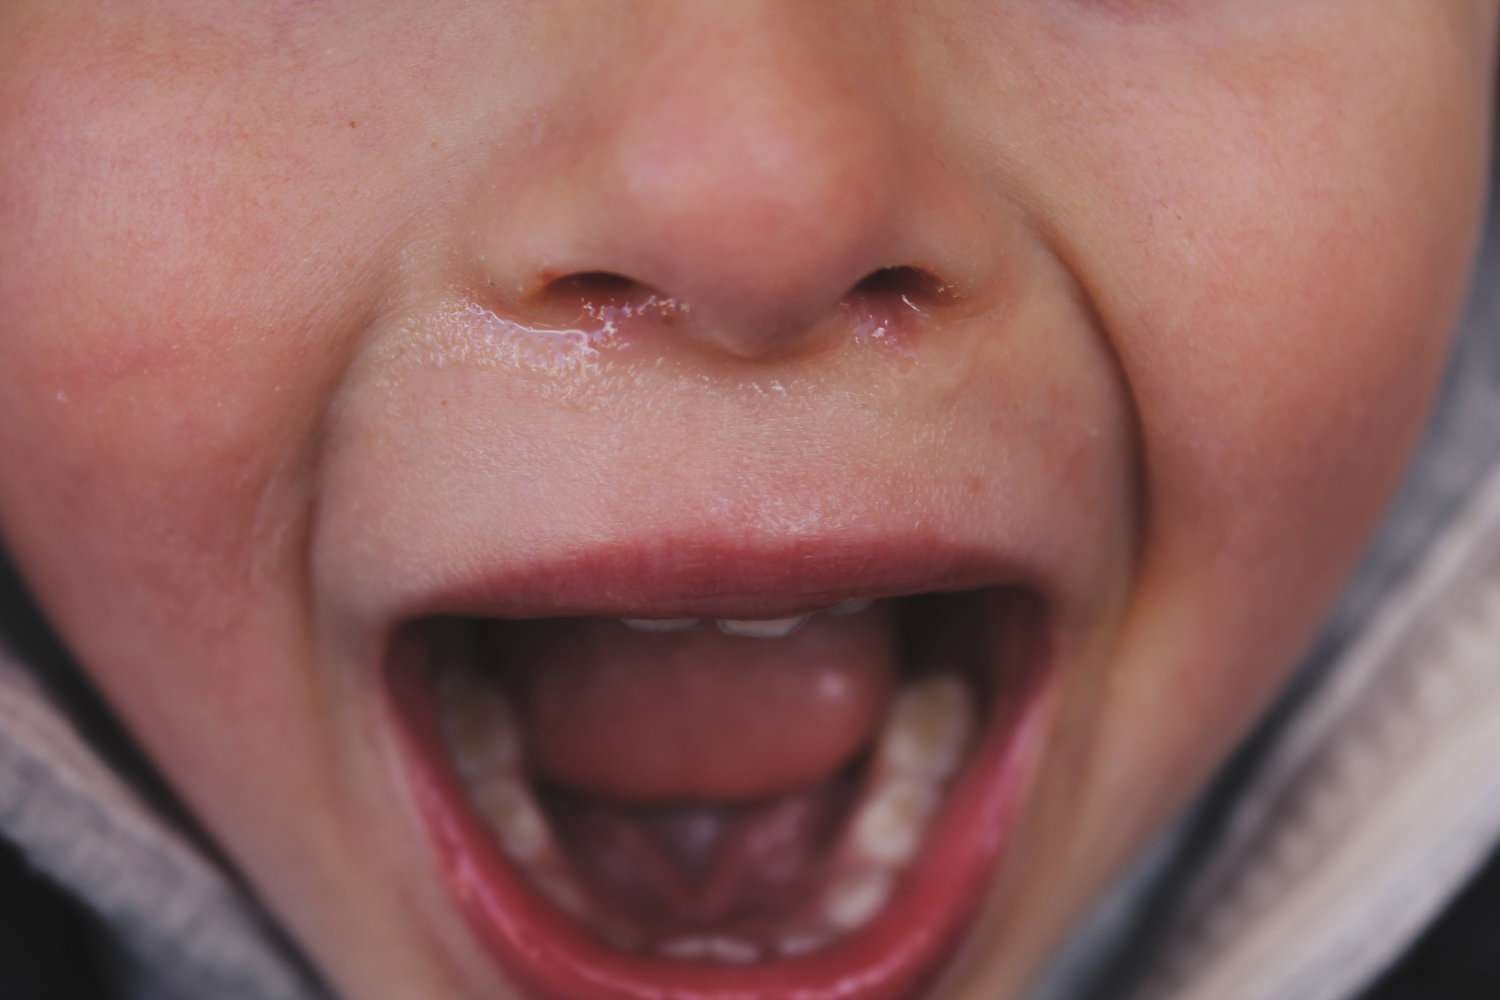 when your child pinches, bites, or hits it's pretty fucking awful. Here's how to deal with toddler aggression.